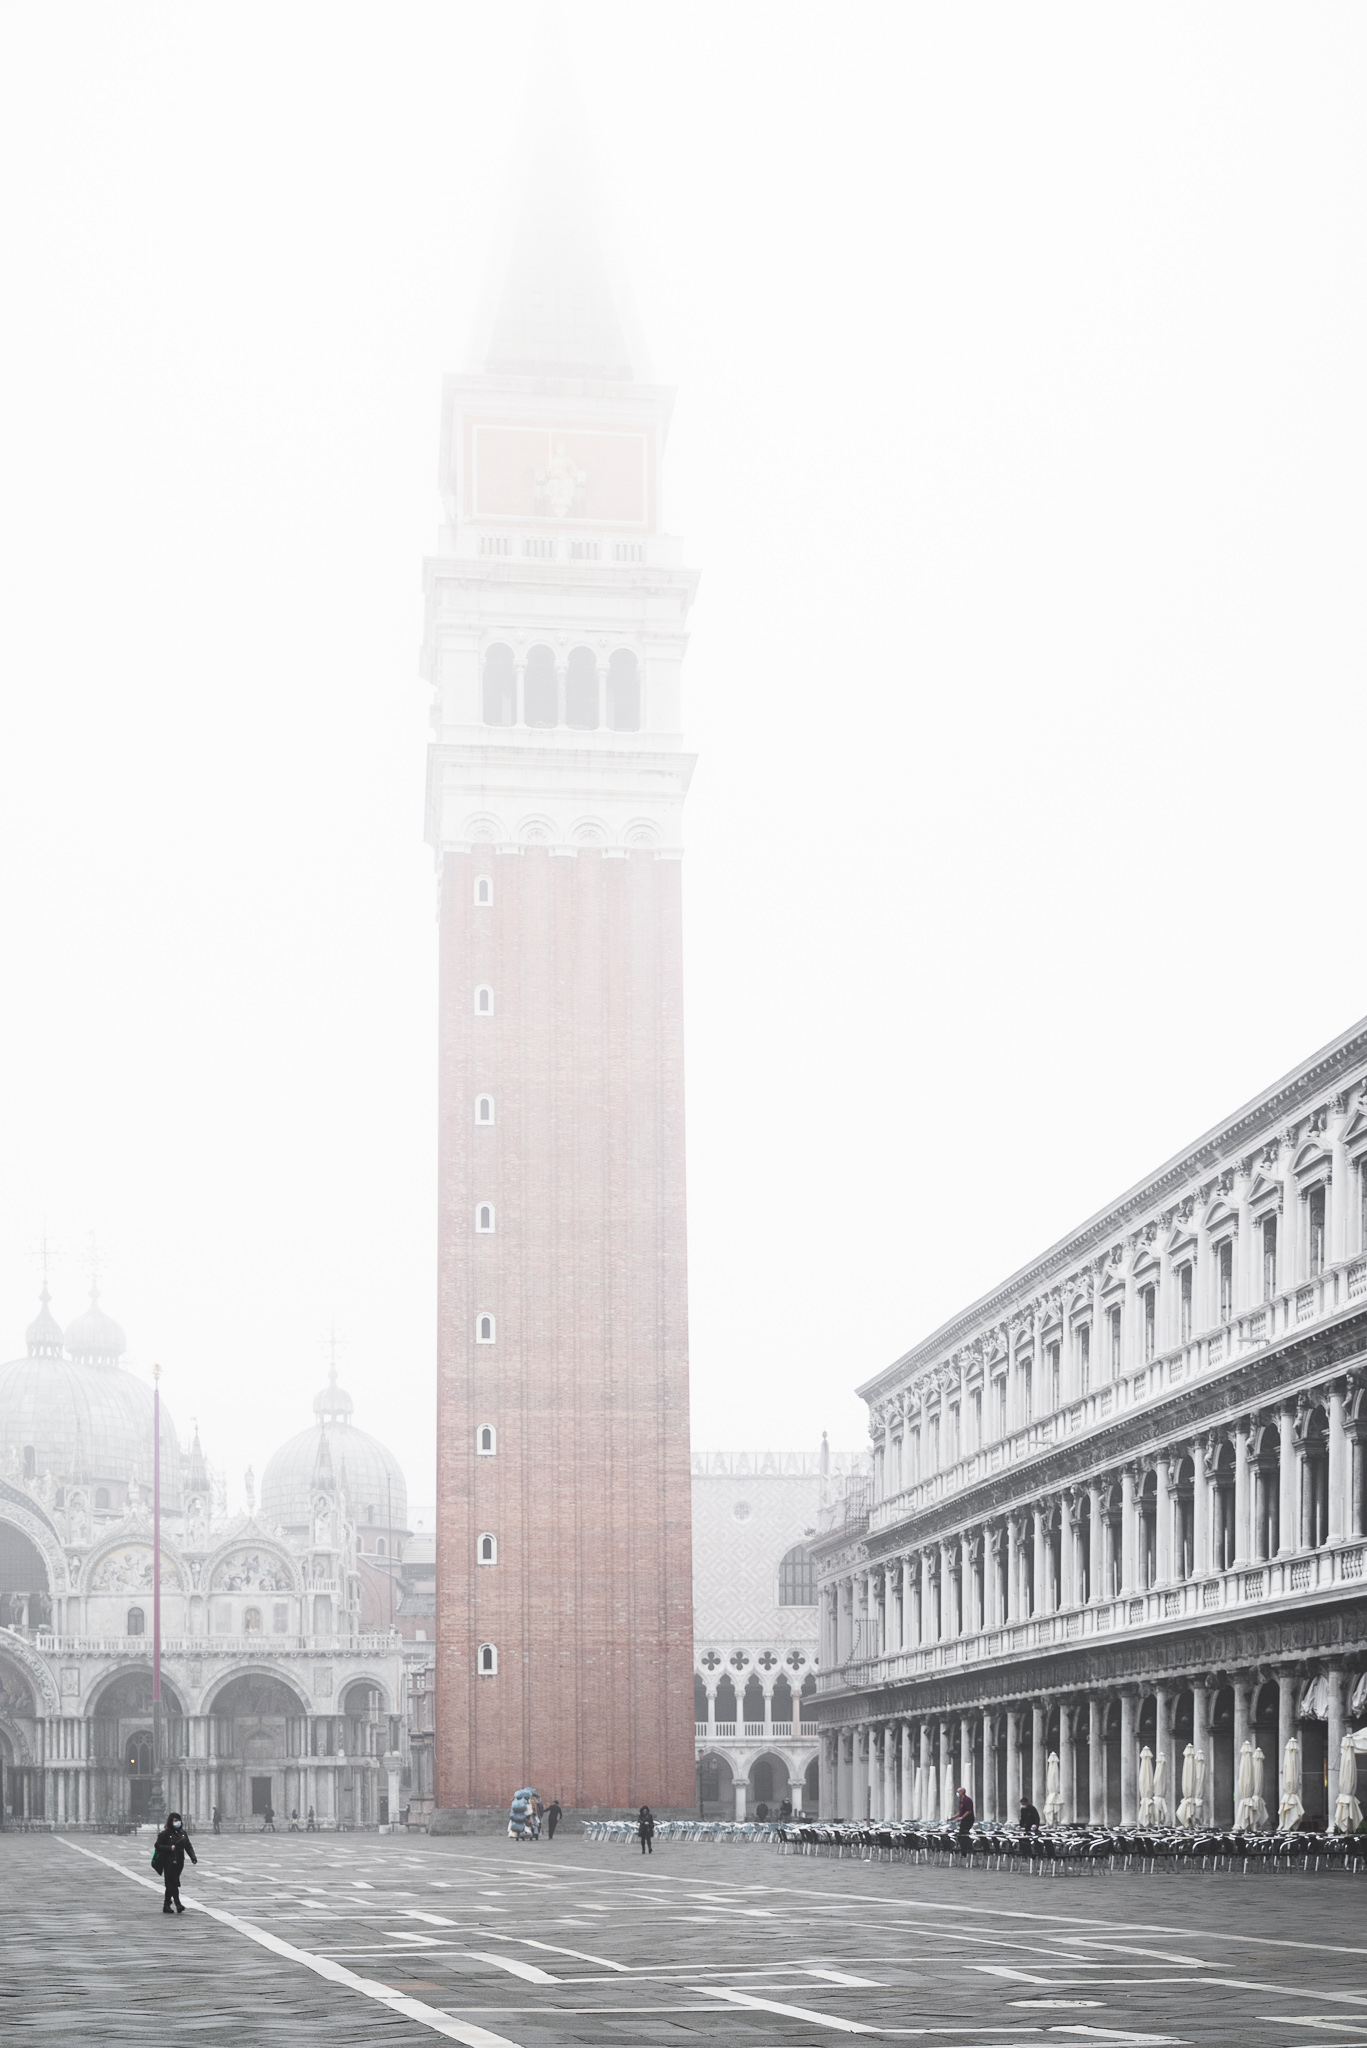 San Marco campanile in the clouds